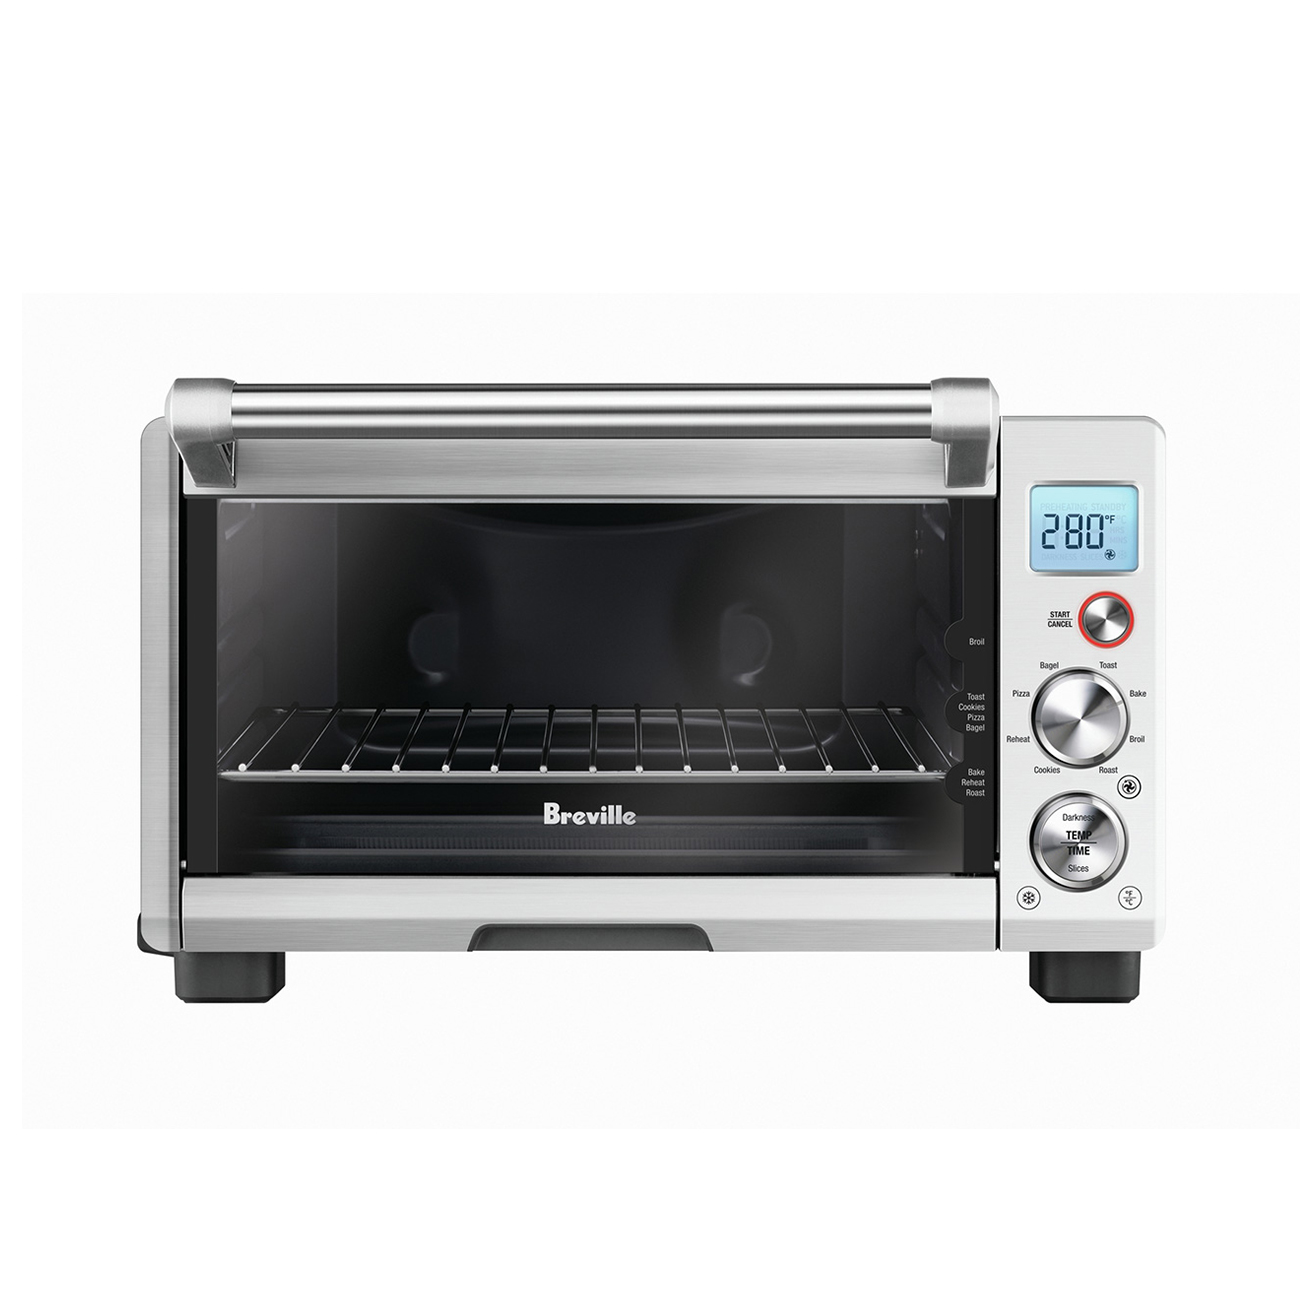 The Smart Oven Compact Convection